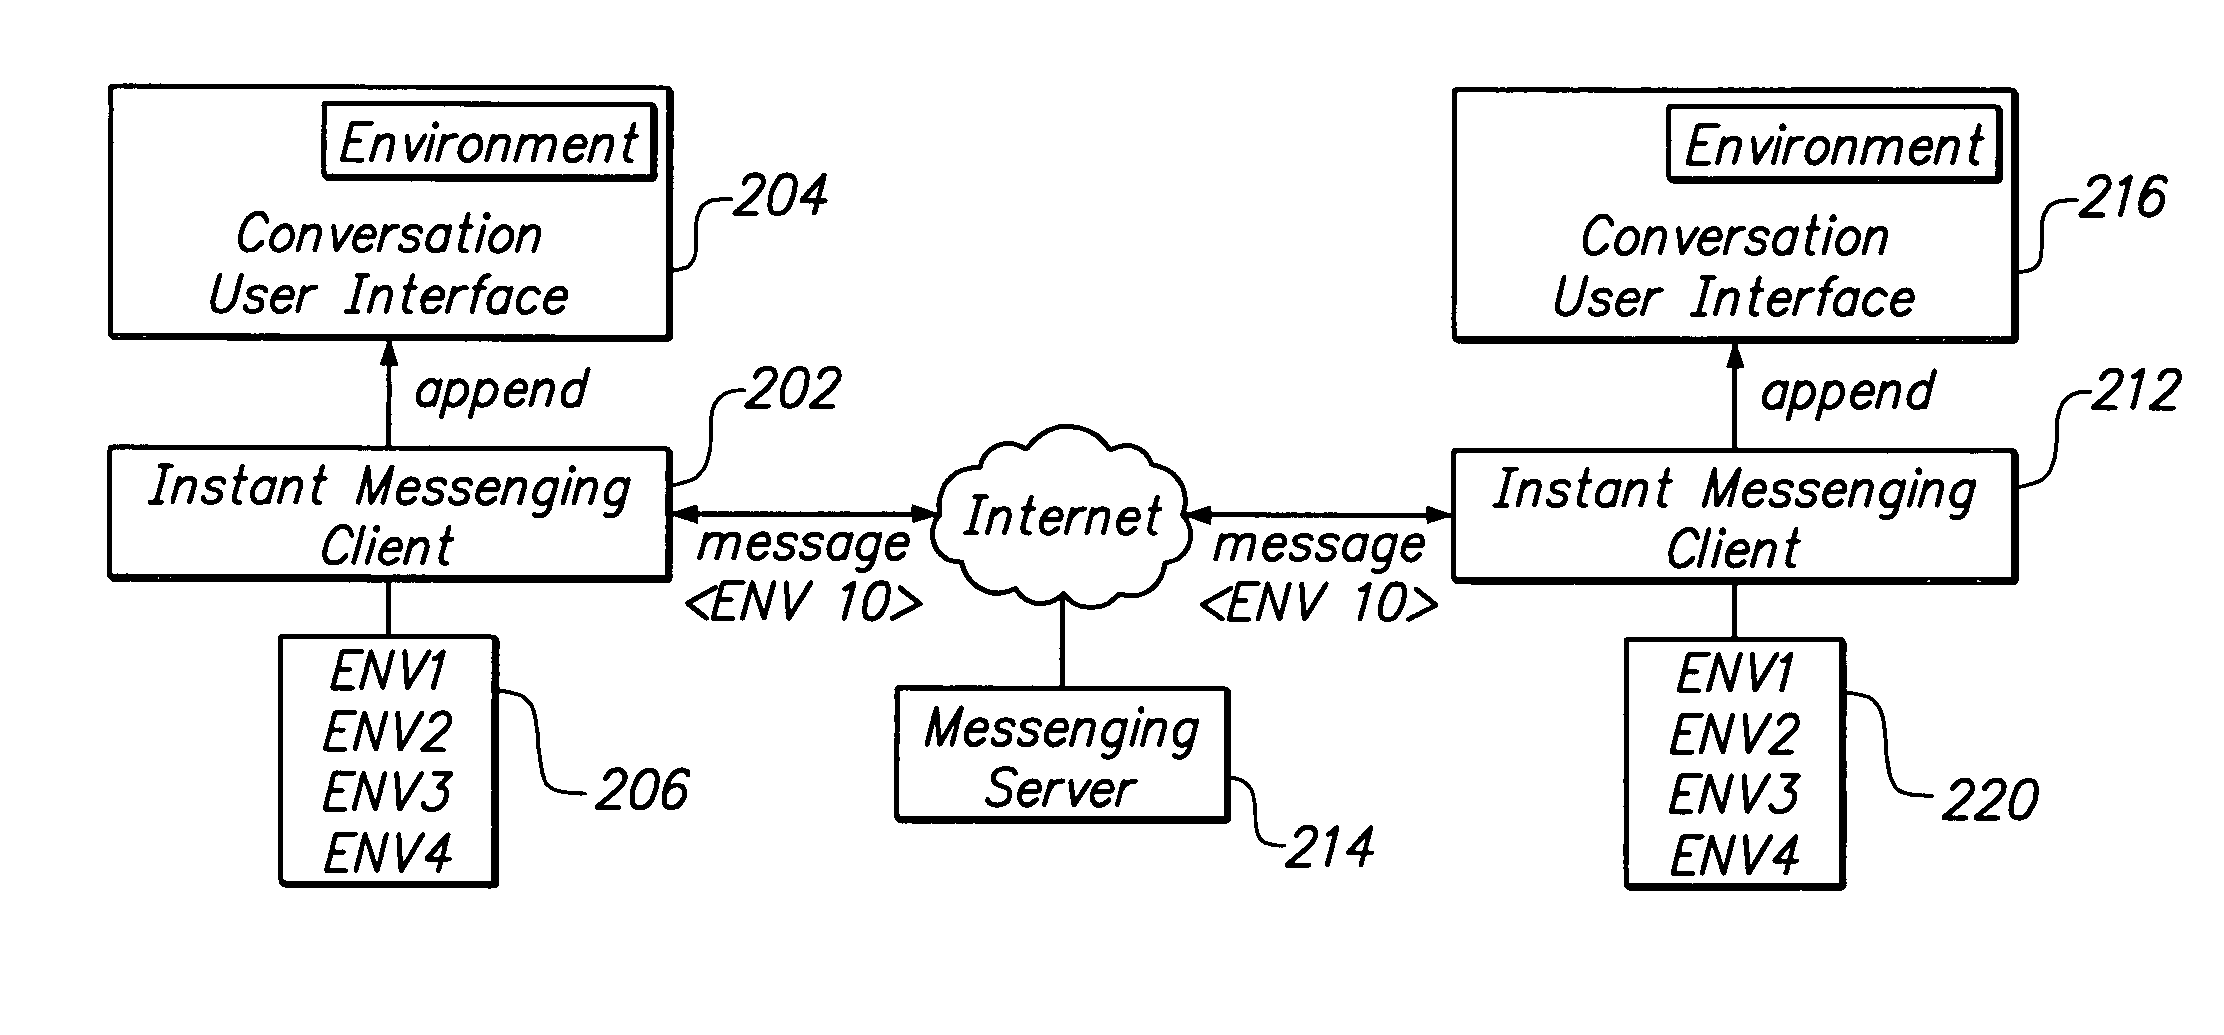 Sharing and implementing instant messaging environments